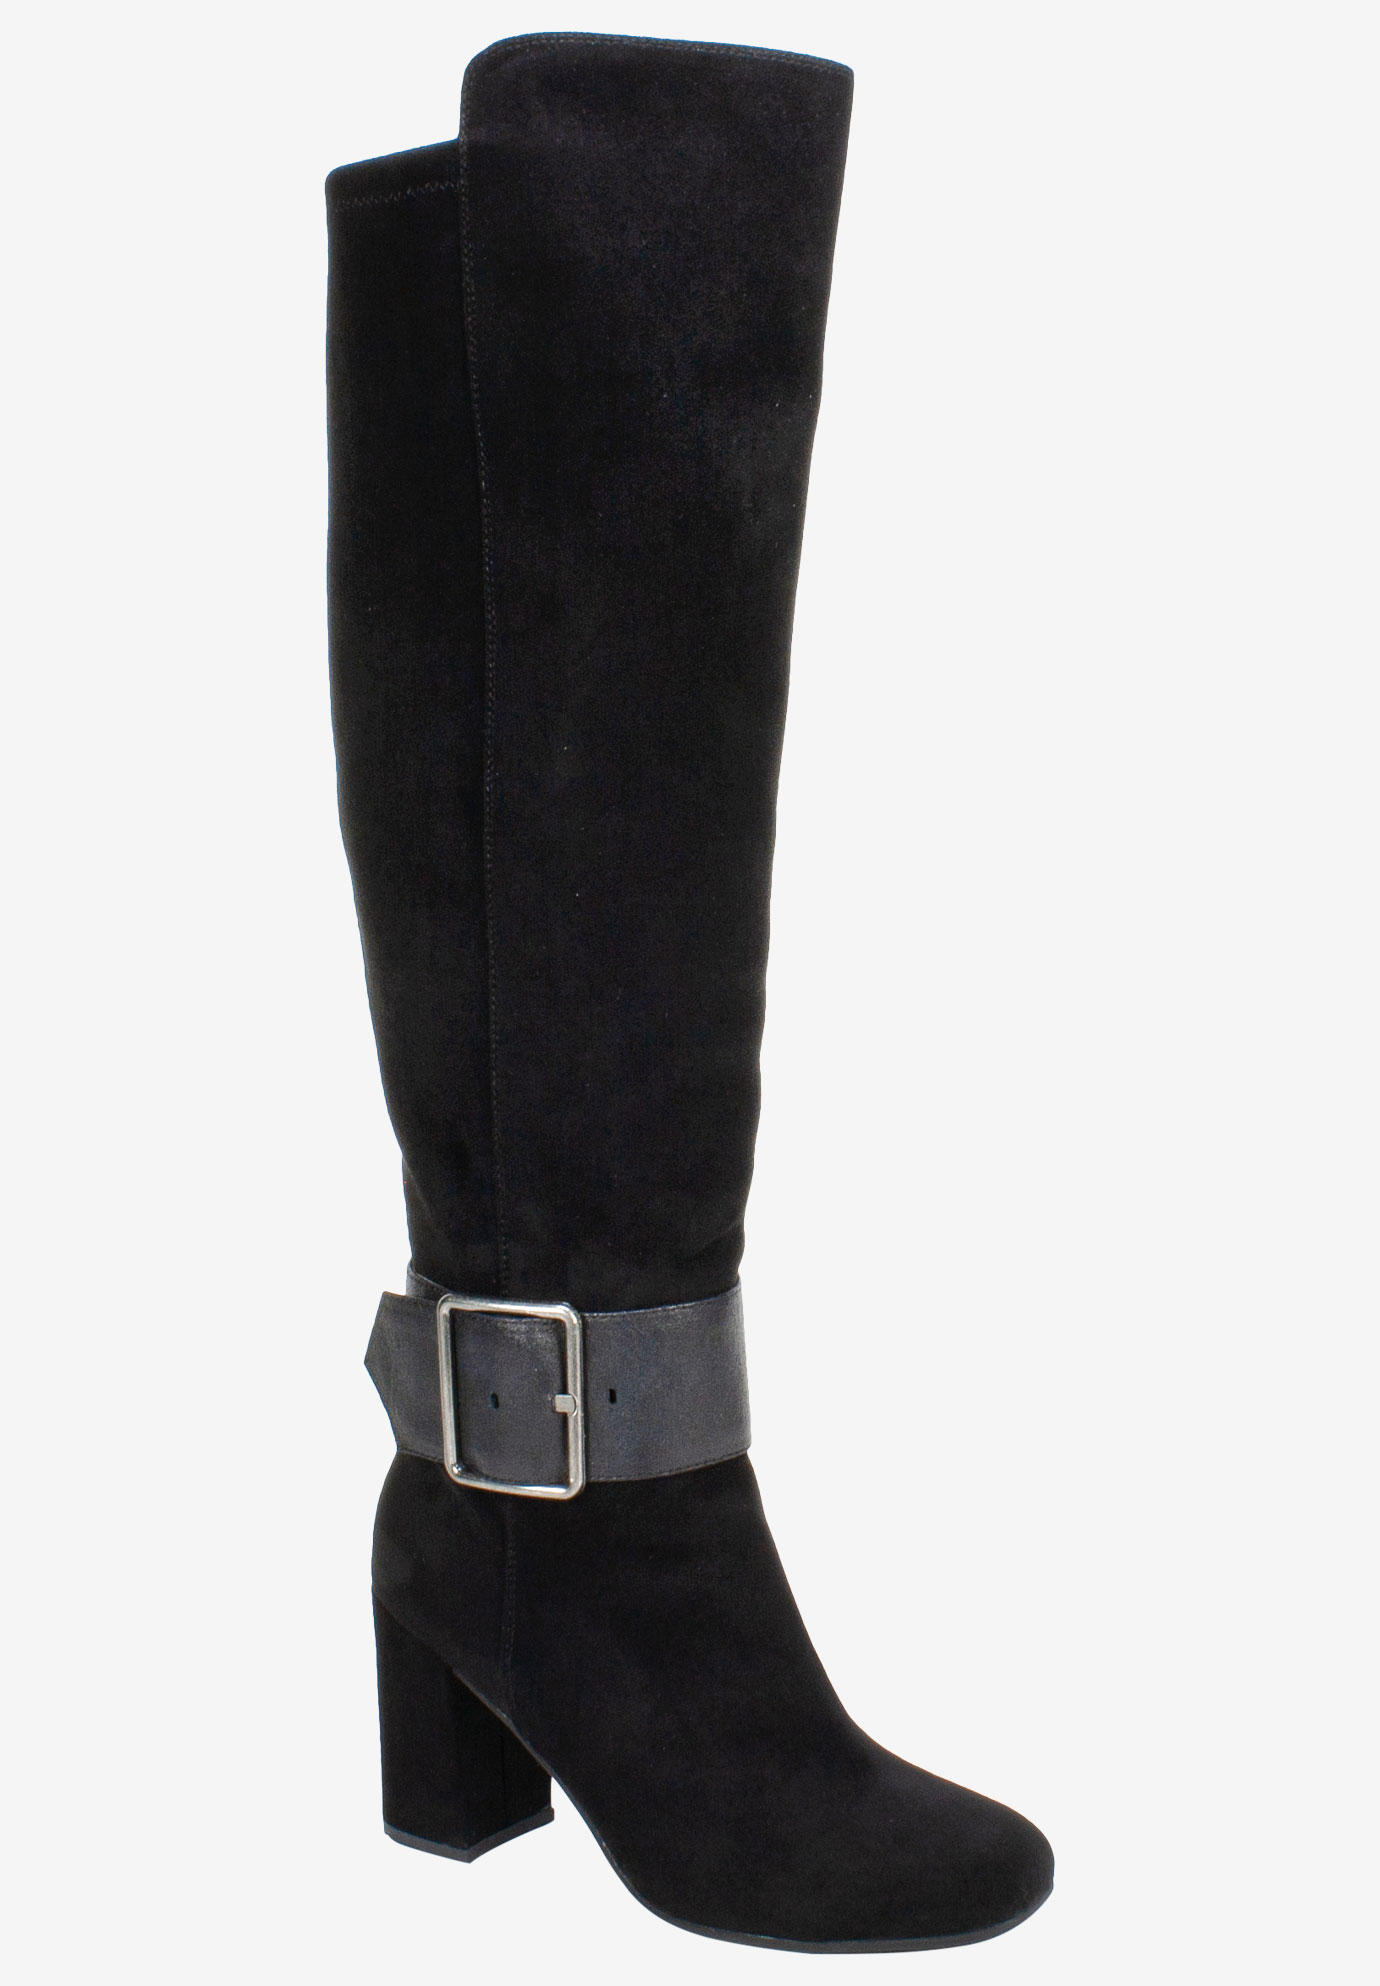 Katrina Knee-High Boot by White Mountain| Plus Size Regular Calf Boots ...